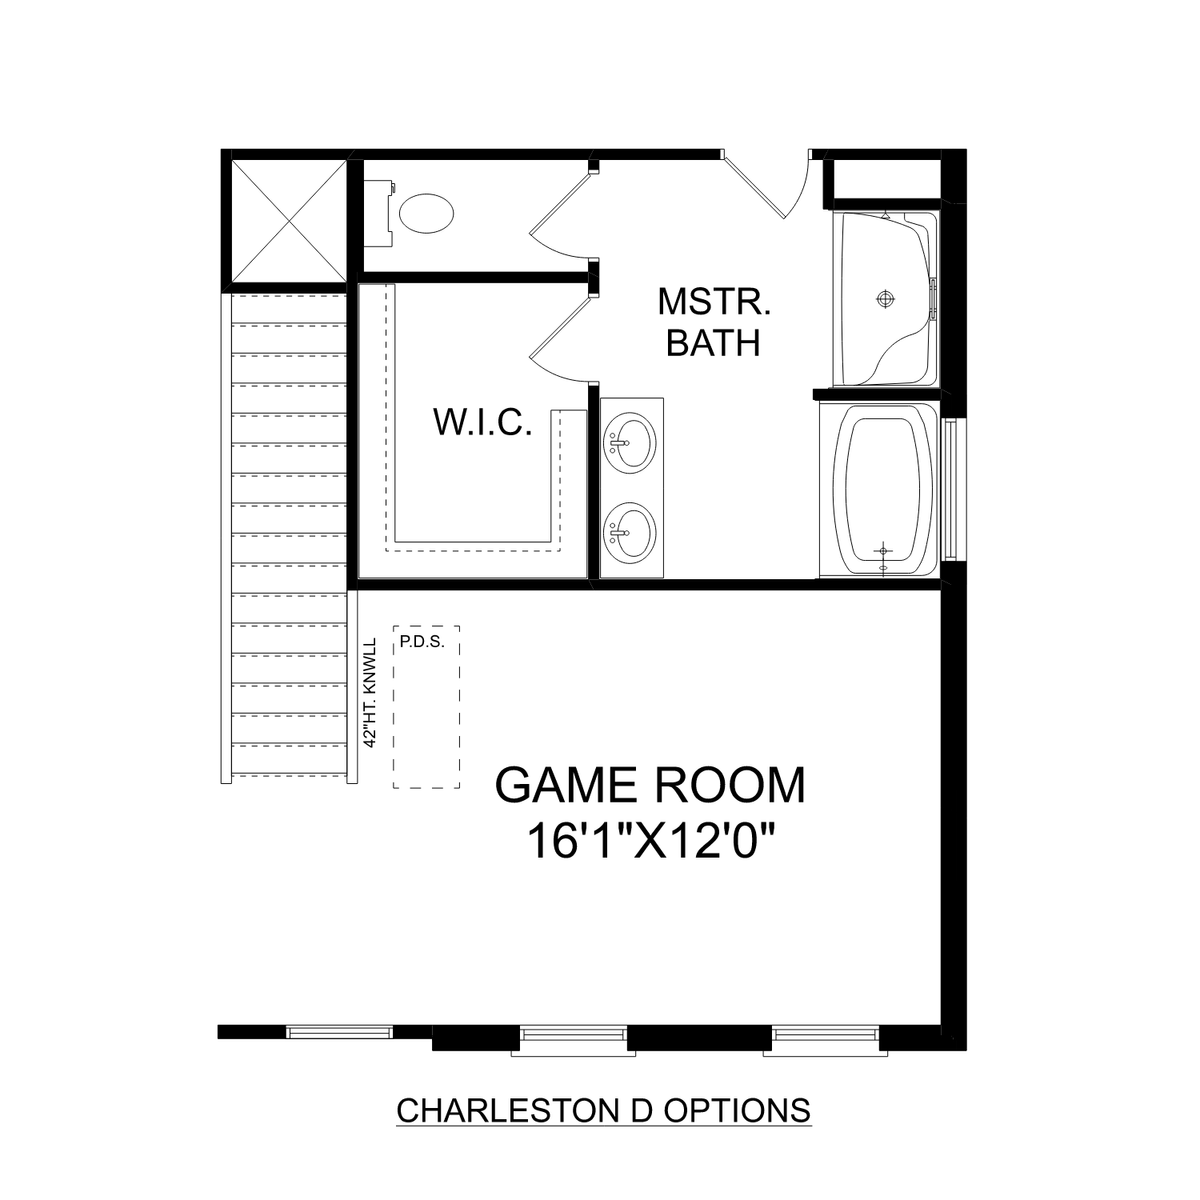 3 - The Charleston D buildable floor plan layout in Davidson Homes' Clearview community.